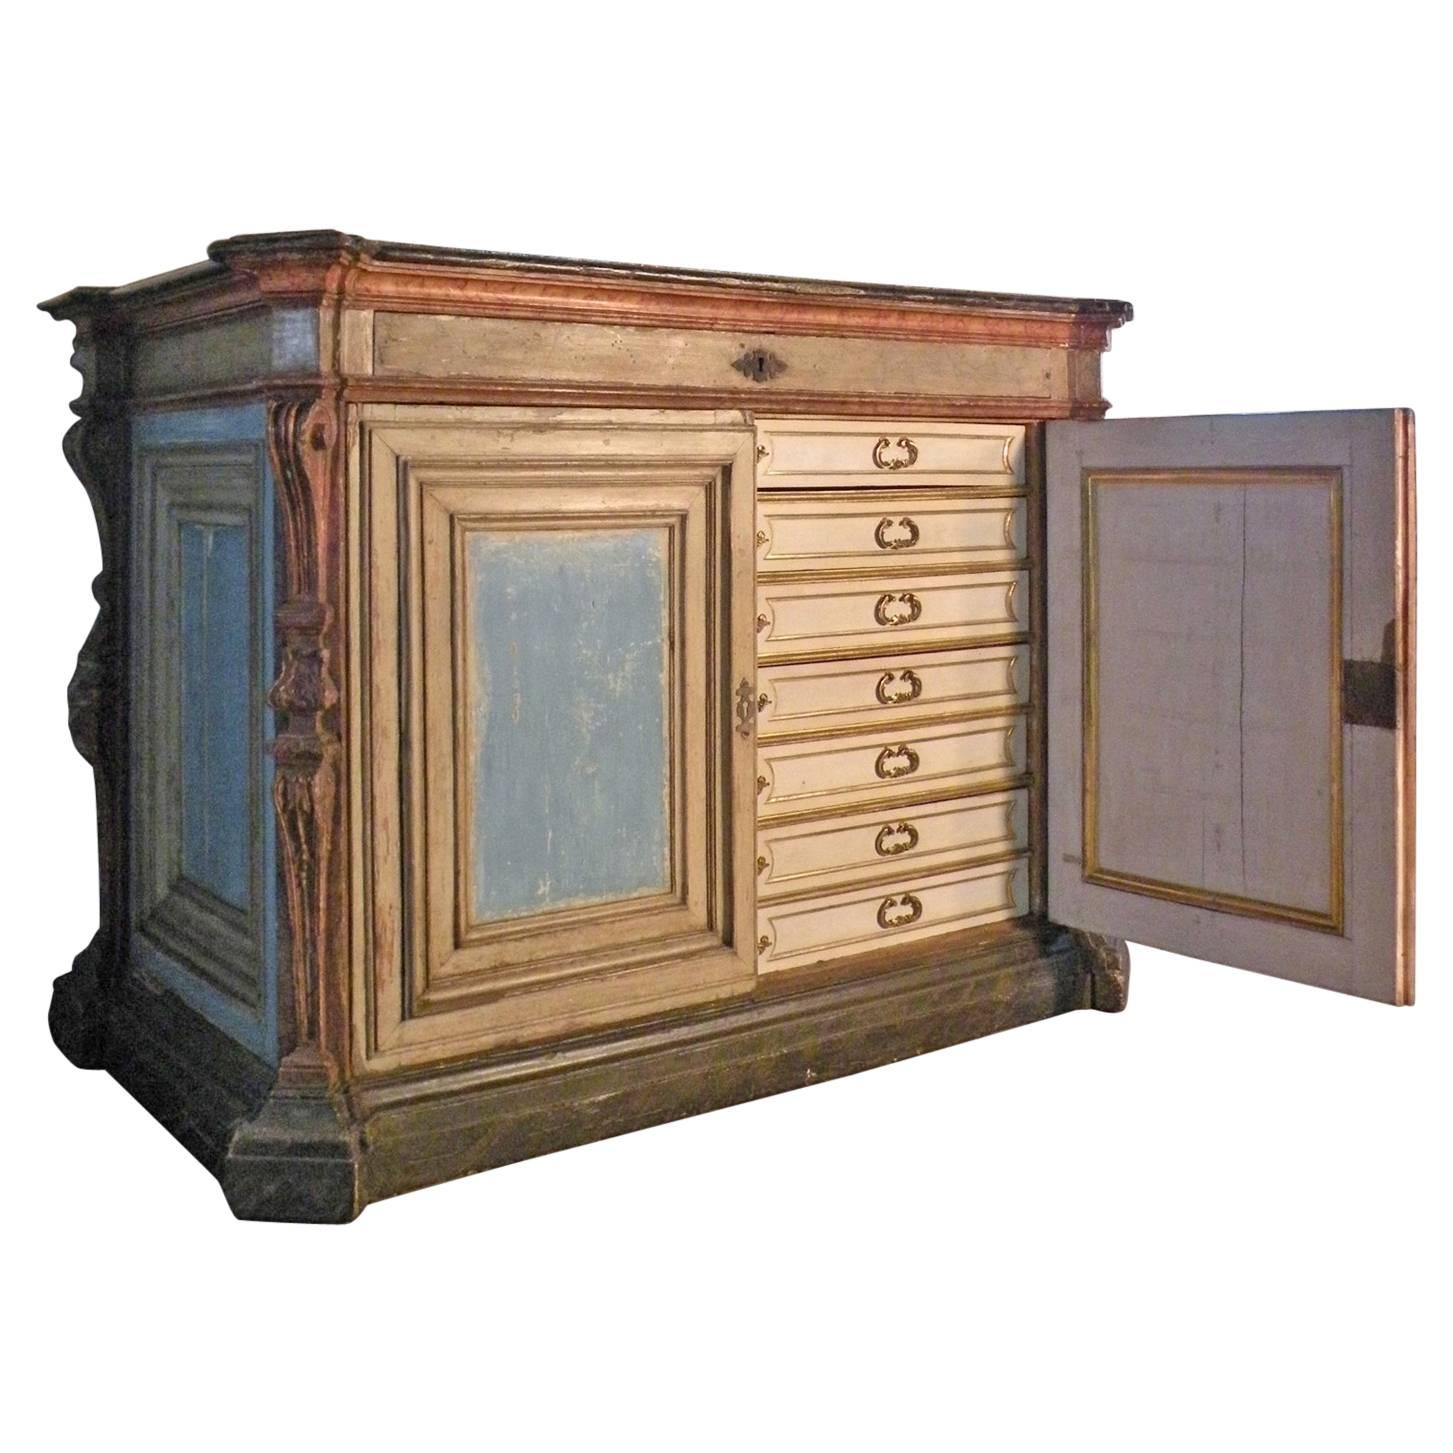 Large Italian Baroque 17th century Painted Cabinet Fitted with Drawers For Sale